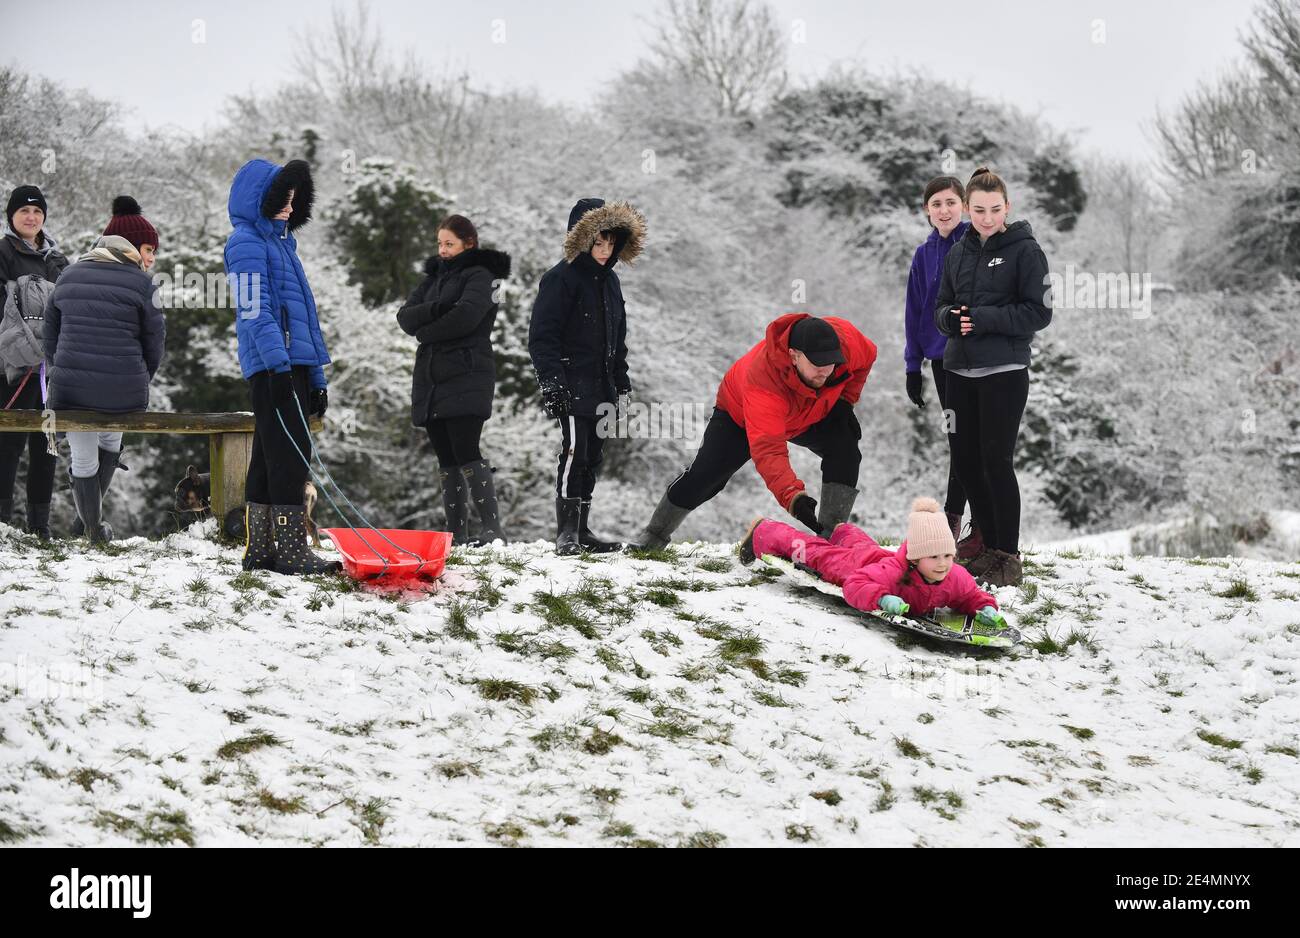 Ironbridge, Shropshire, Uk January 24th 2021. Sledging in the snow with a helping hand from dad on the Ironbridge hills as families have fun in the winter snow. Credit: David Bagnall/Alamy Live News Stock Photo